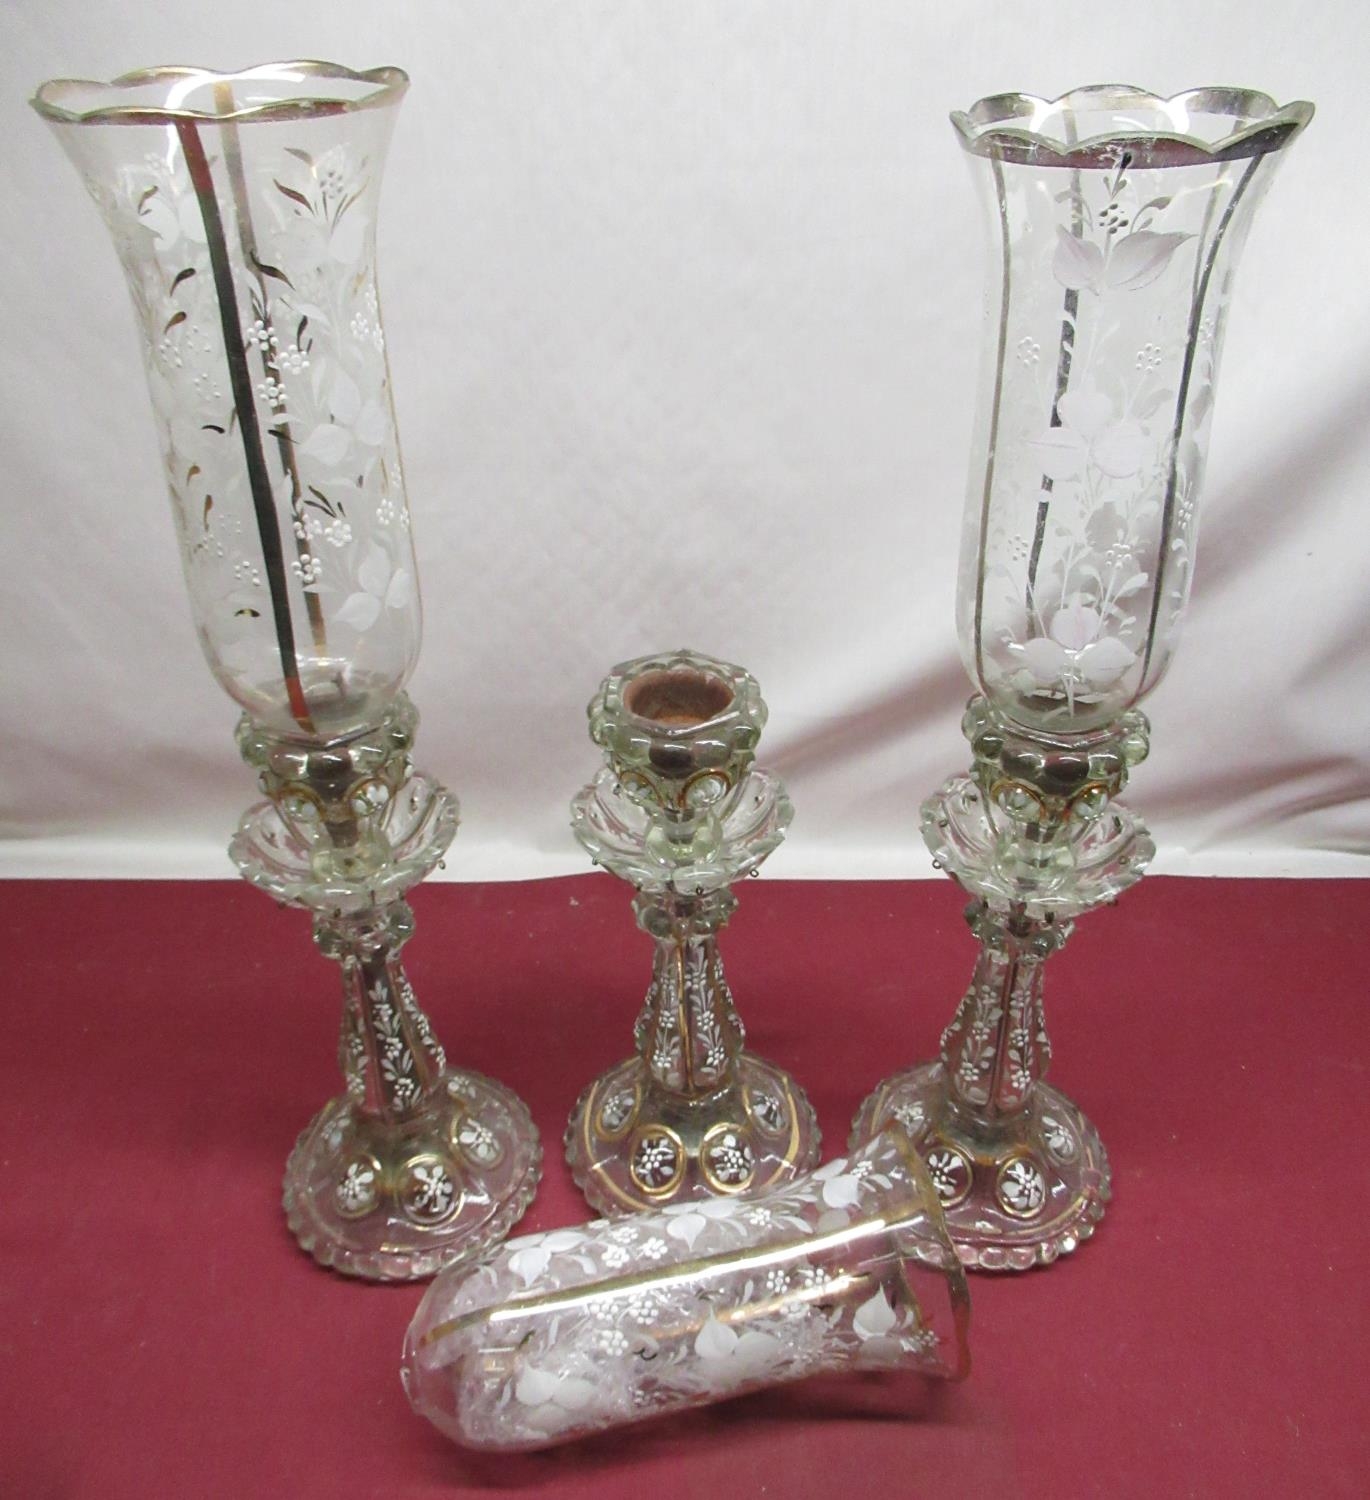 Late C19th glass candle lamp lustres painted in floral enamels with matching funnel shades ( - Image 2 of 2